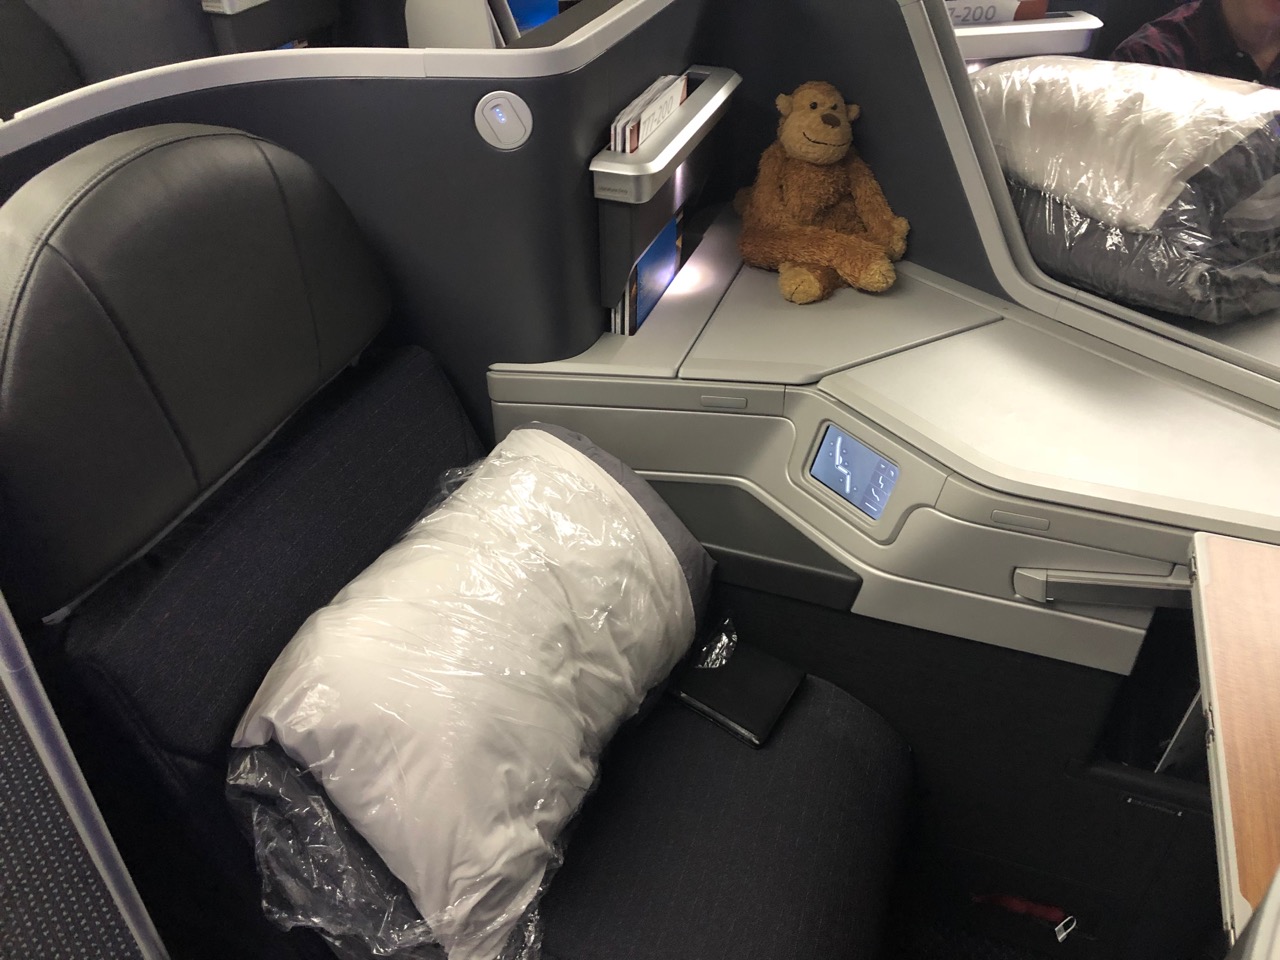 a stuffed animal on the seat of a plane